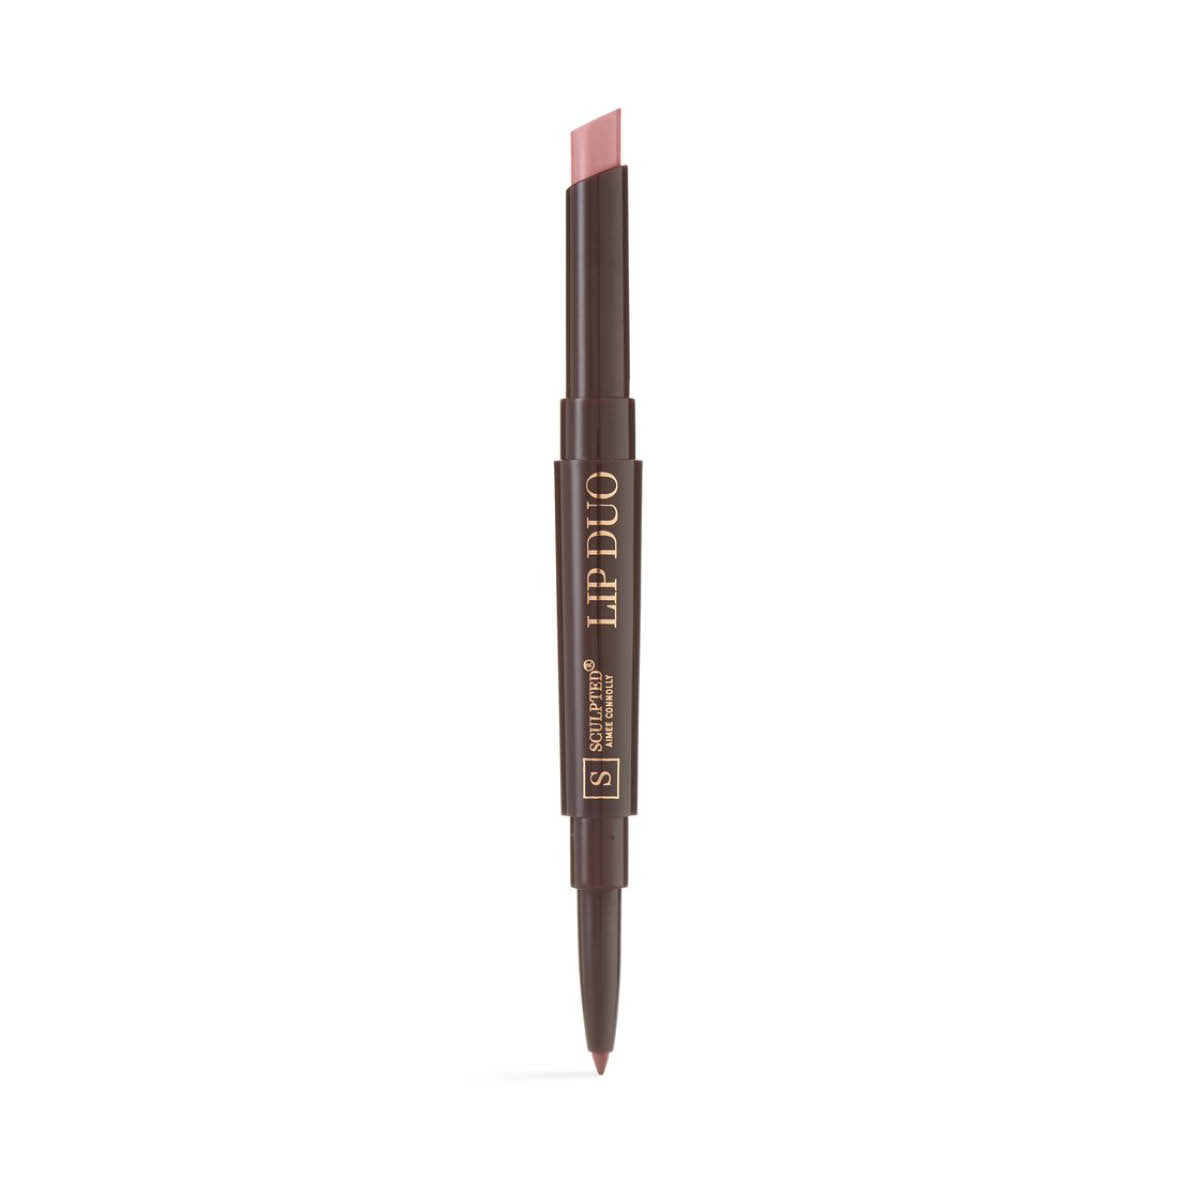 Sculpted By Aimee Connolly Undressed Lip Duo Collection - Colour Bare